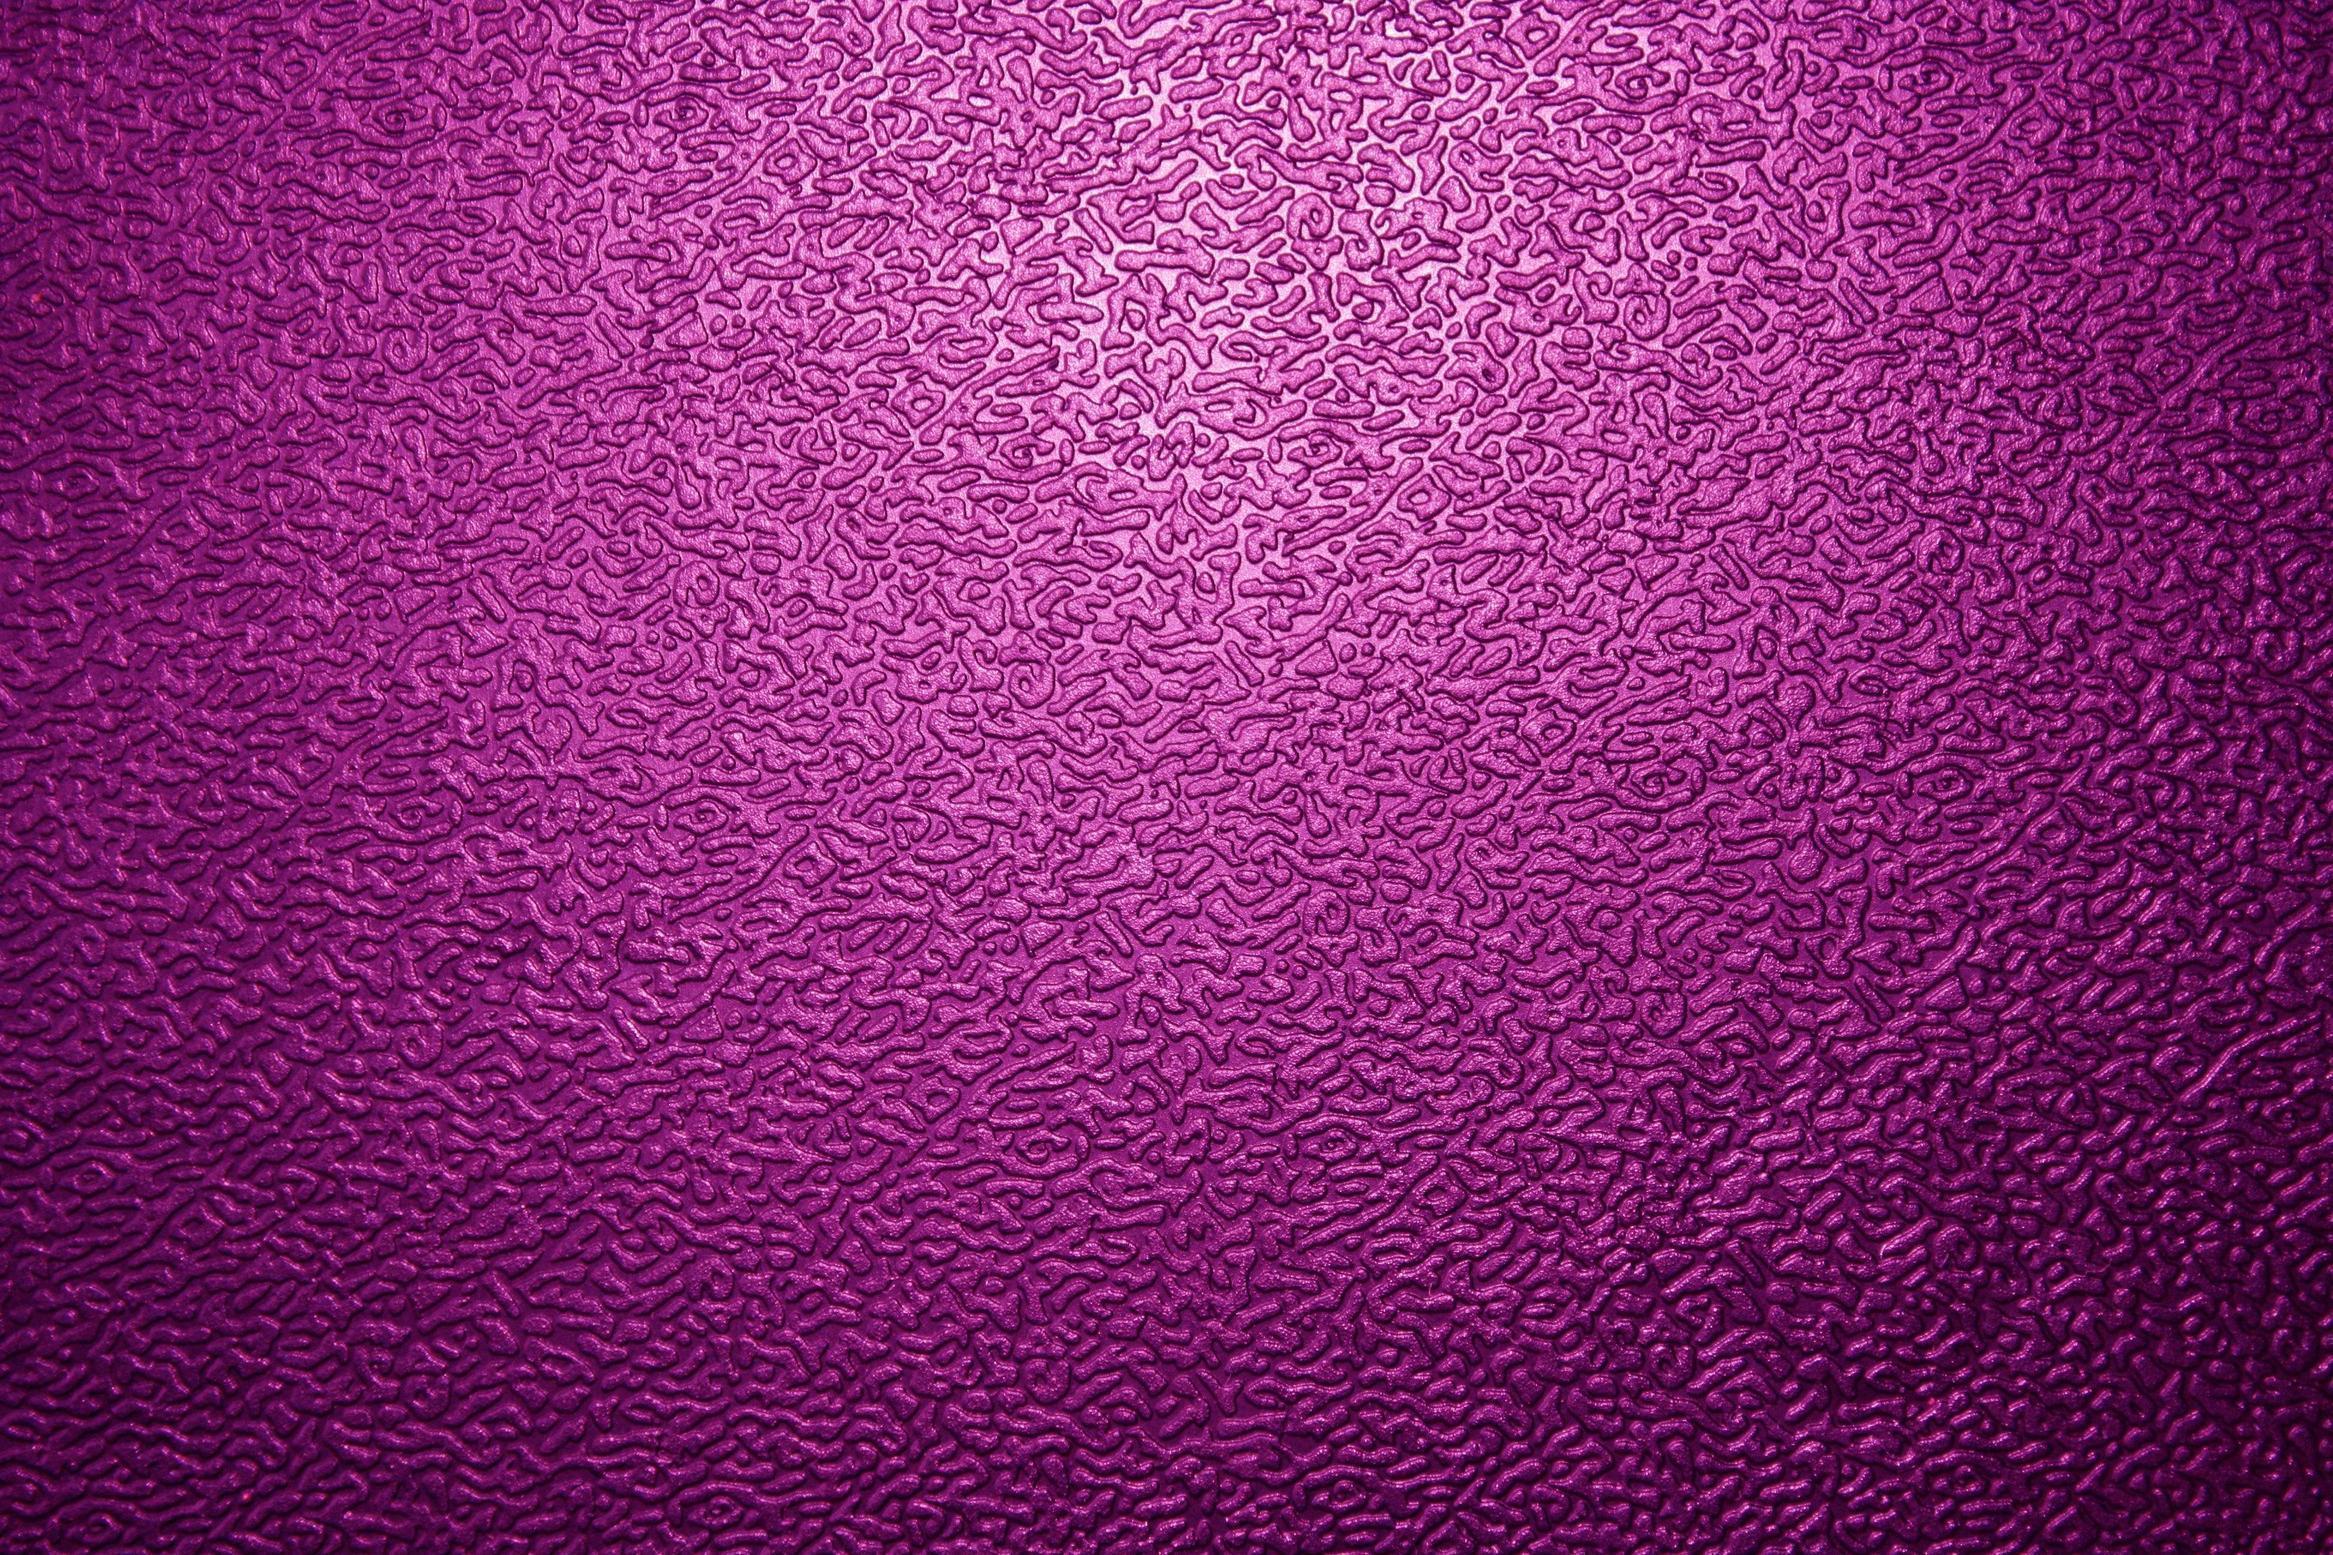 Textured Magenta Plastic Close Up Picture. Free Photograph